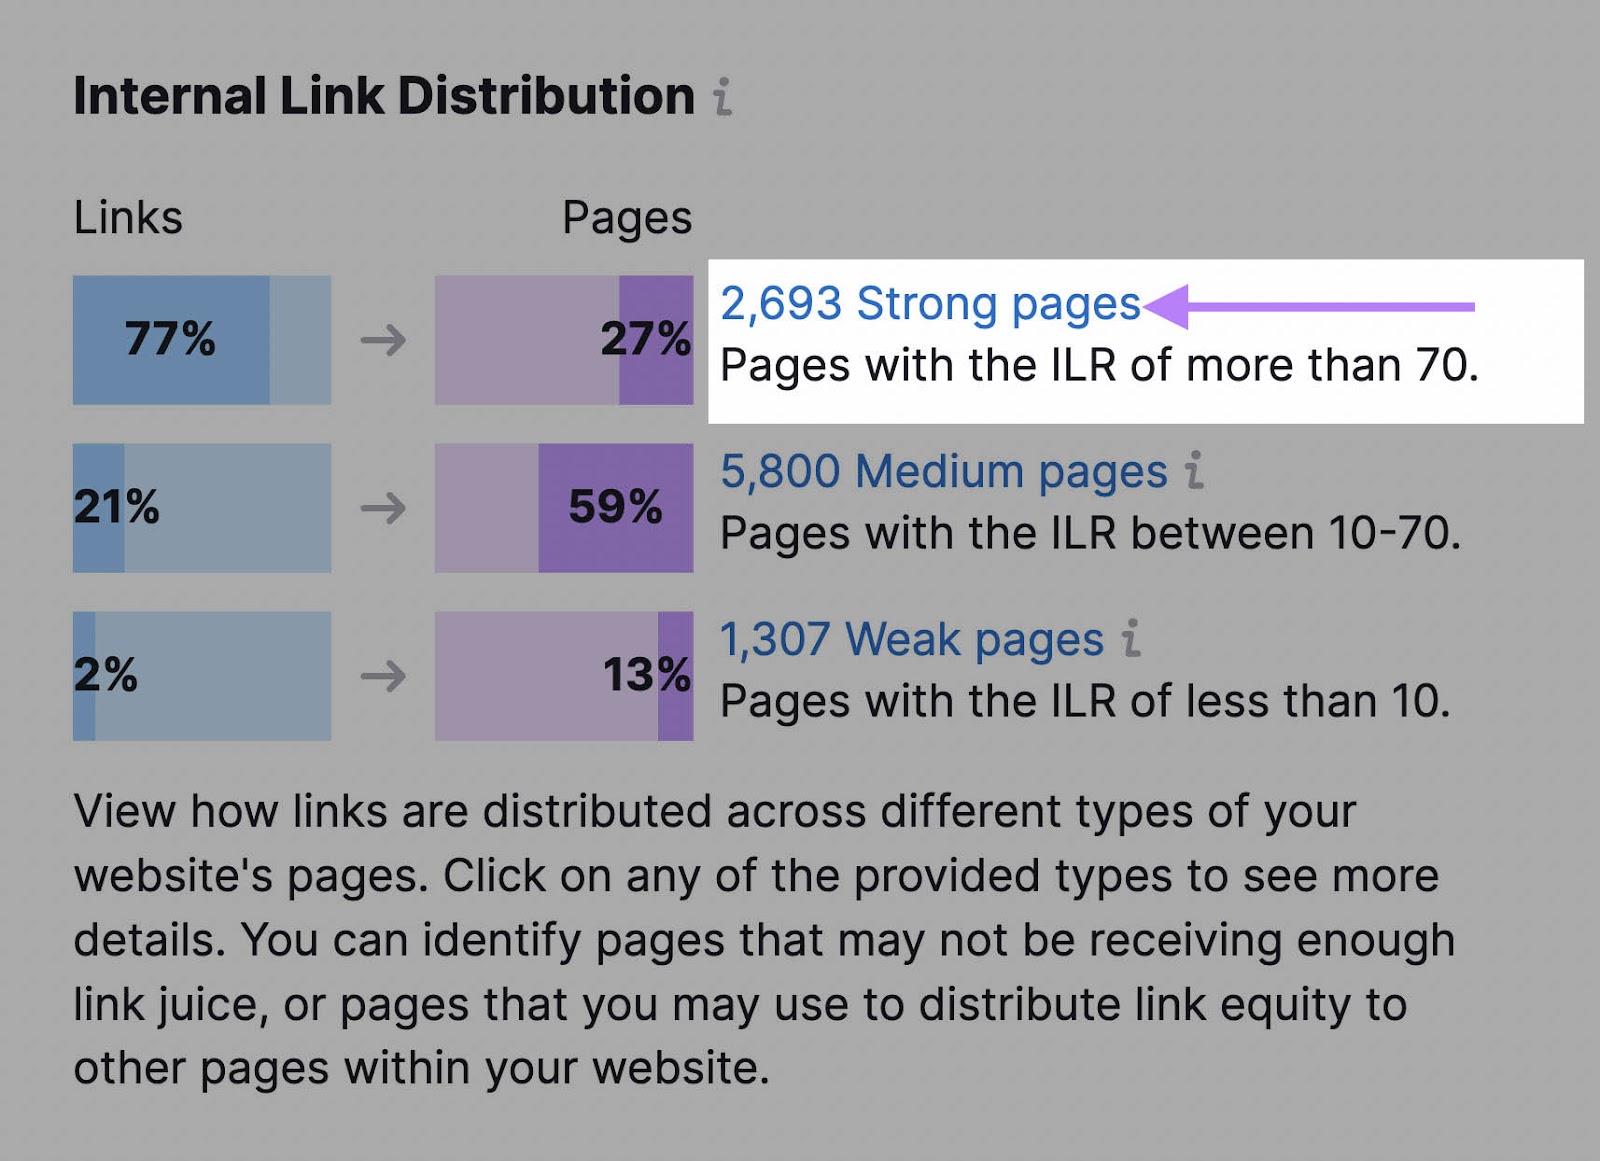 “2,693 Strong pages” link highlighted under "Internal Link Distribution" widget